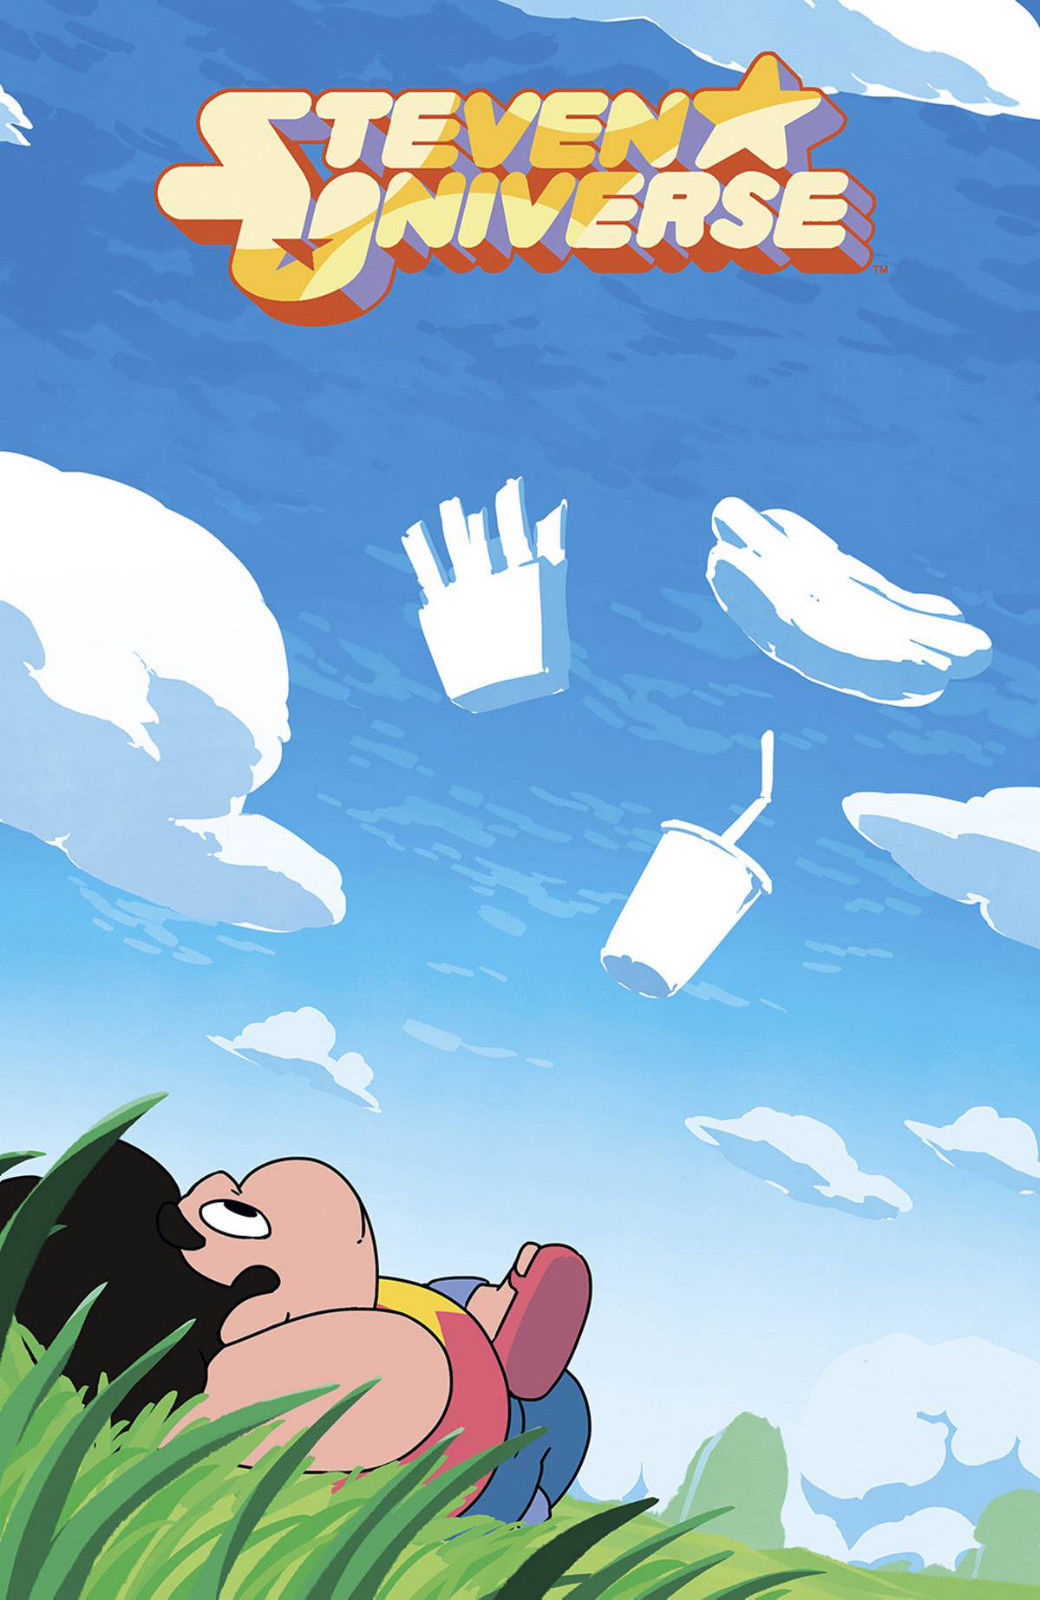 as-warm-as-choco:  STEVEN UNIVERSE Comics’ Covers (pt.2) : Illustrated by: Stu